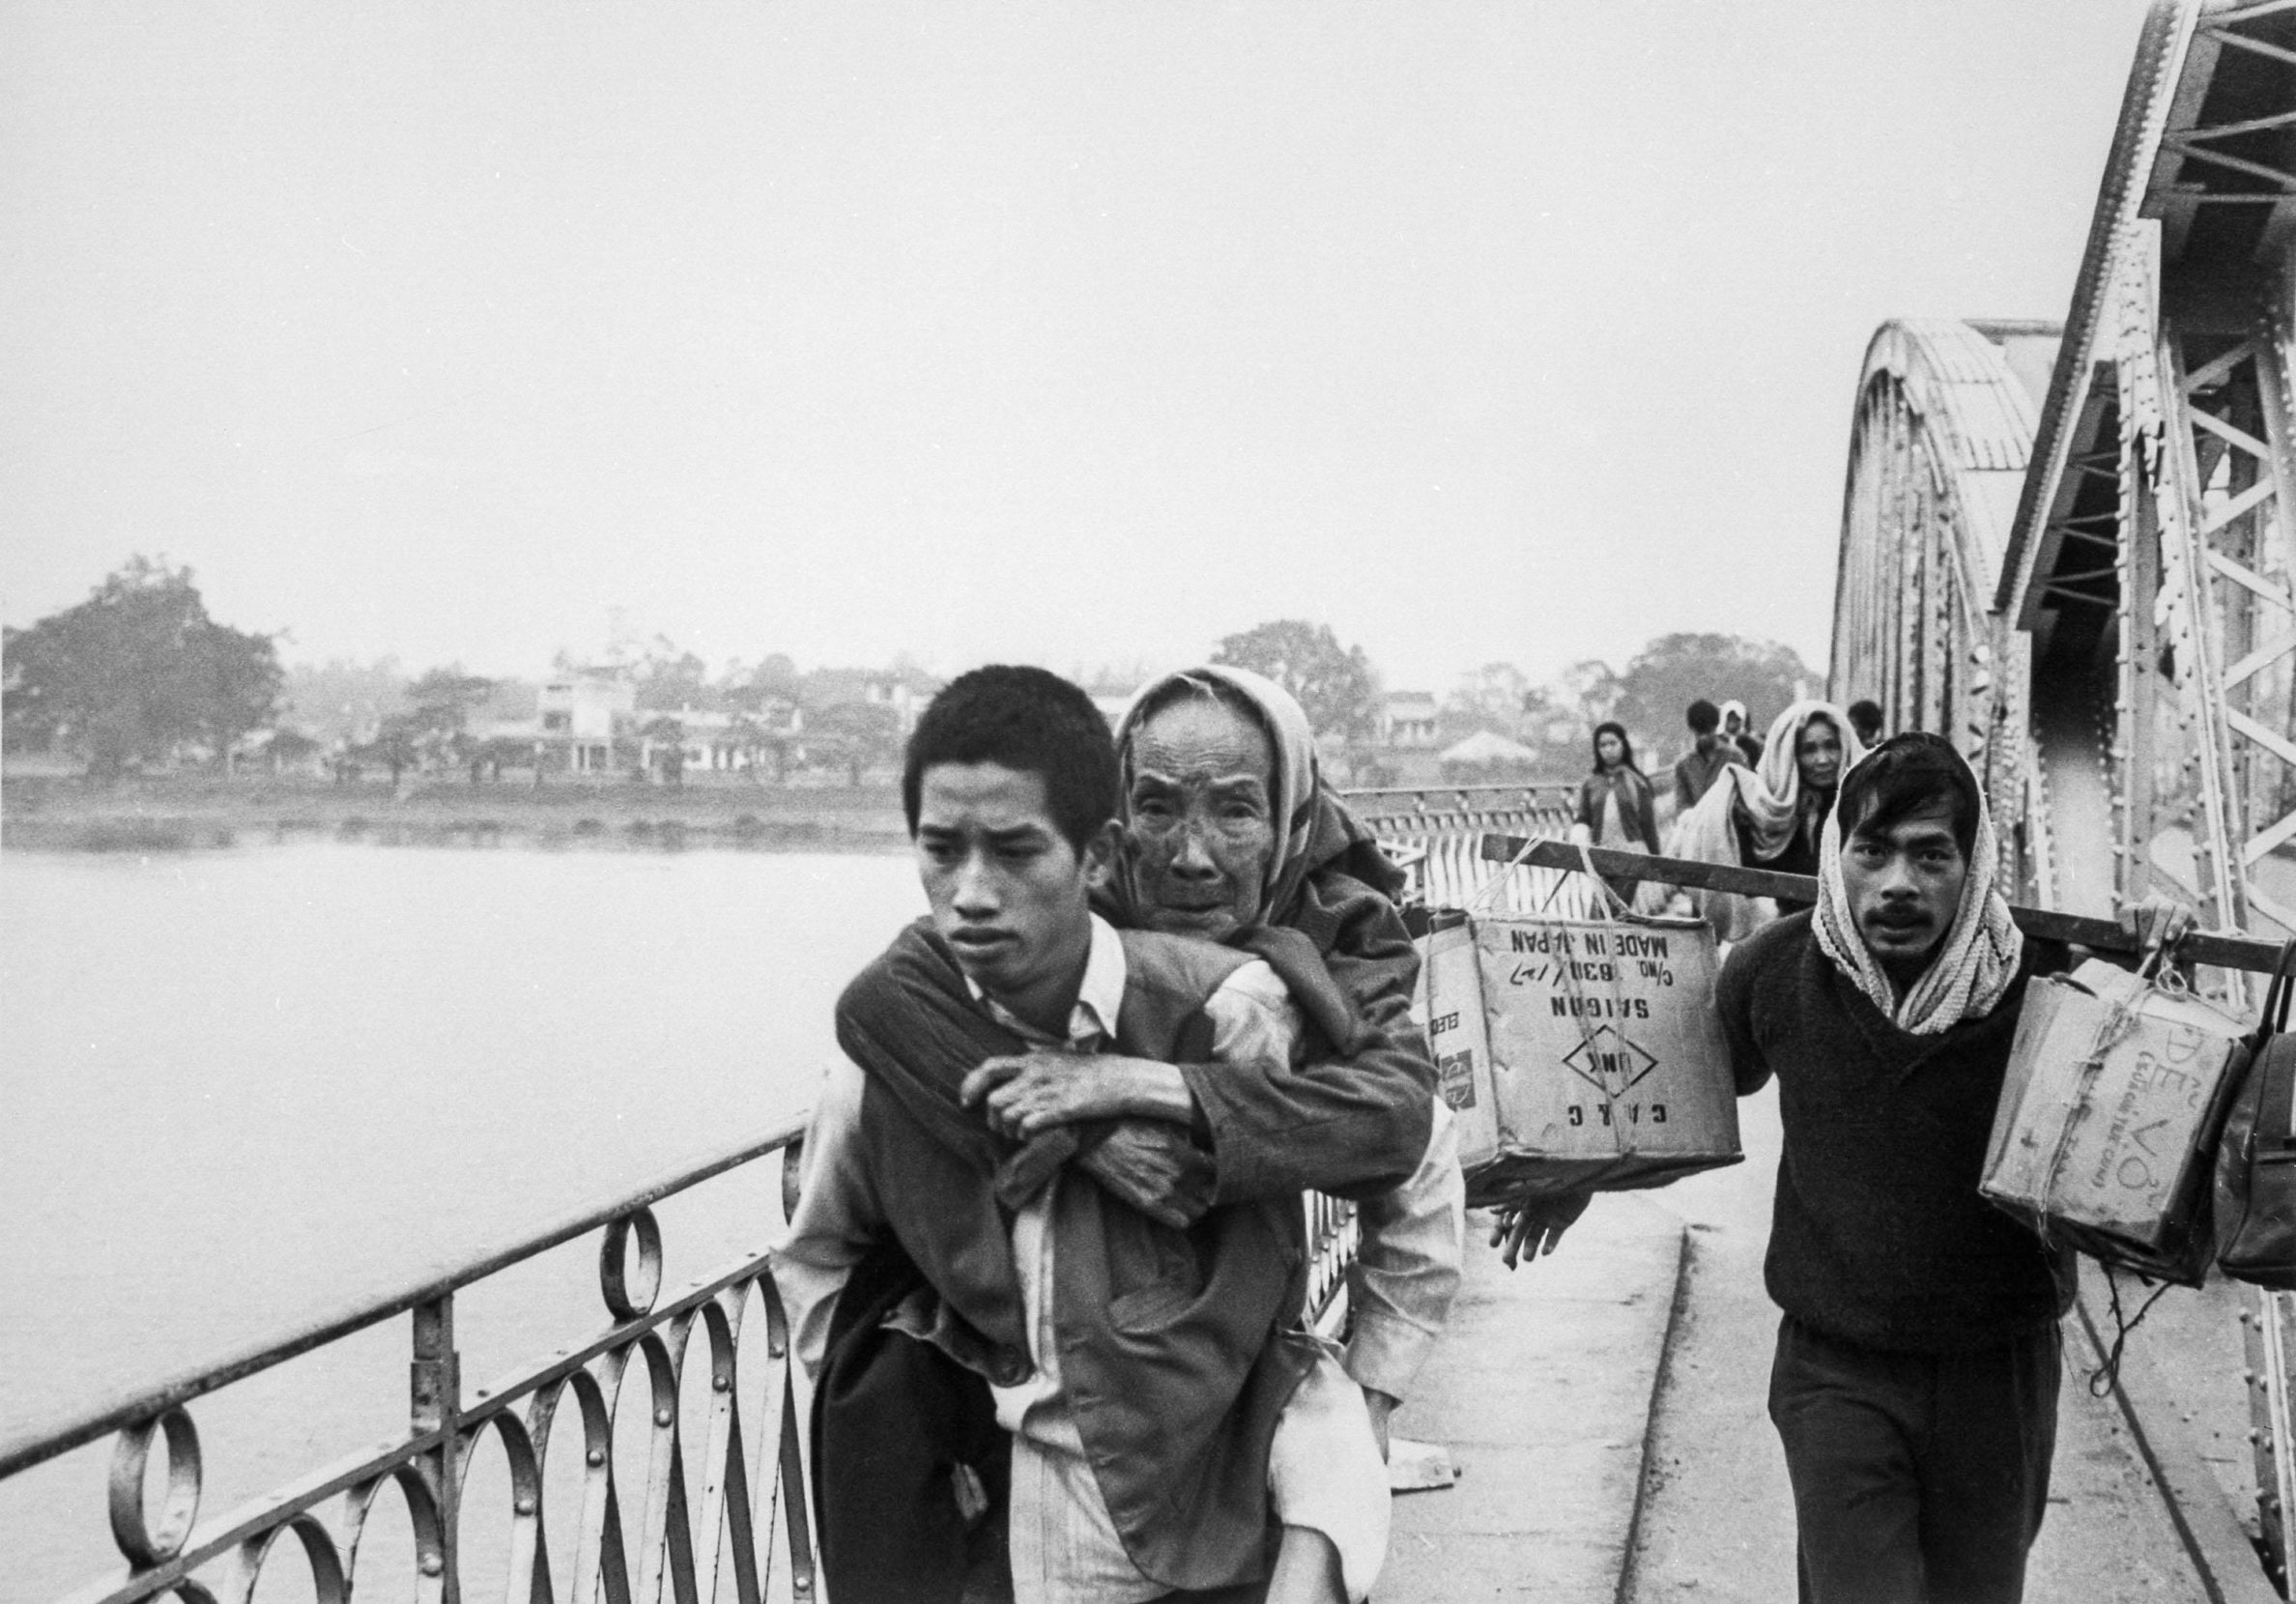 During the Tet Offensive of 1968, refugees of Hue flee across the Perfume River. Days later, the Viet Cong destroyed this bridge connecting the city. Photo: Everett Collection Inc/Alamy.